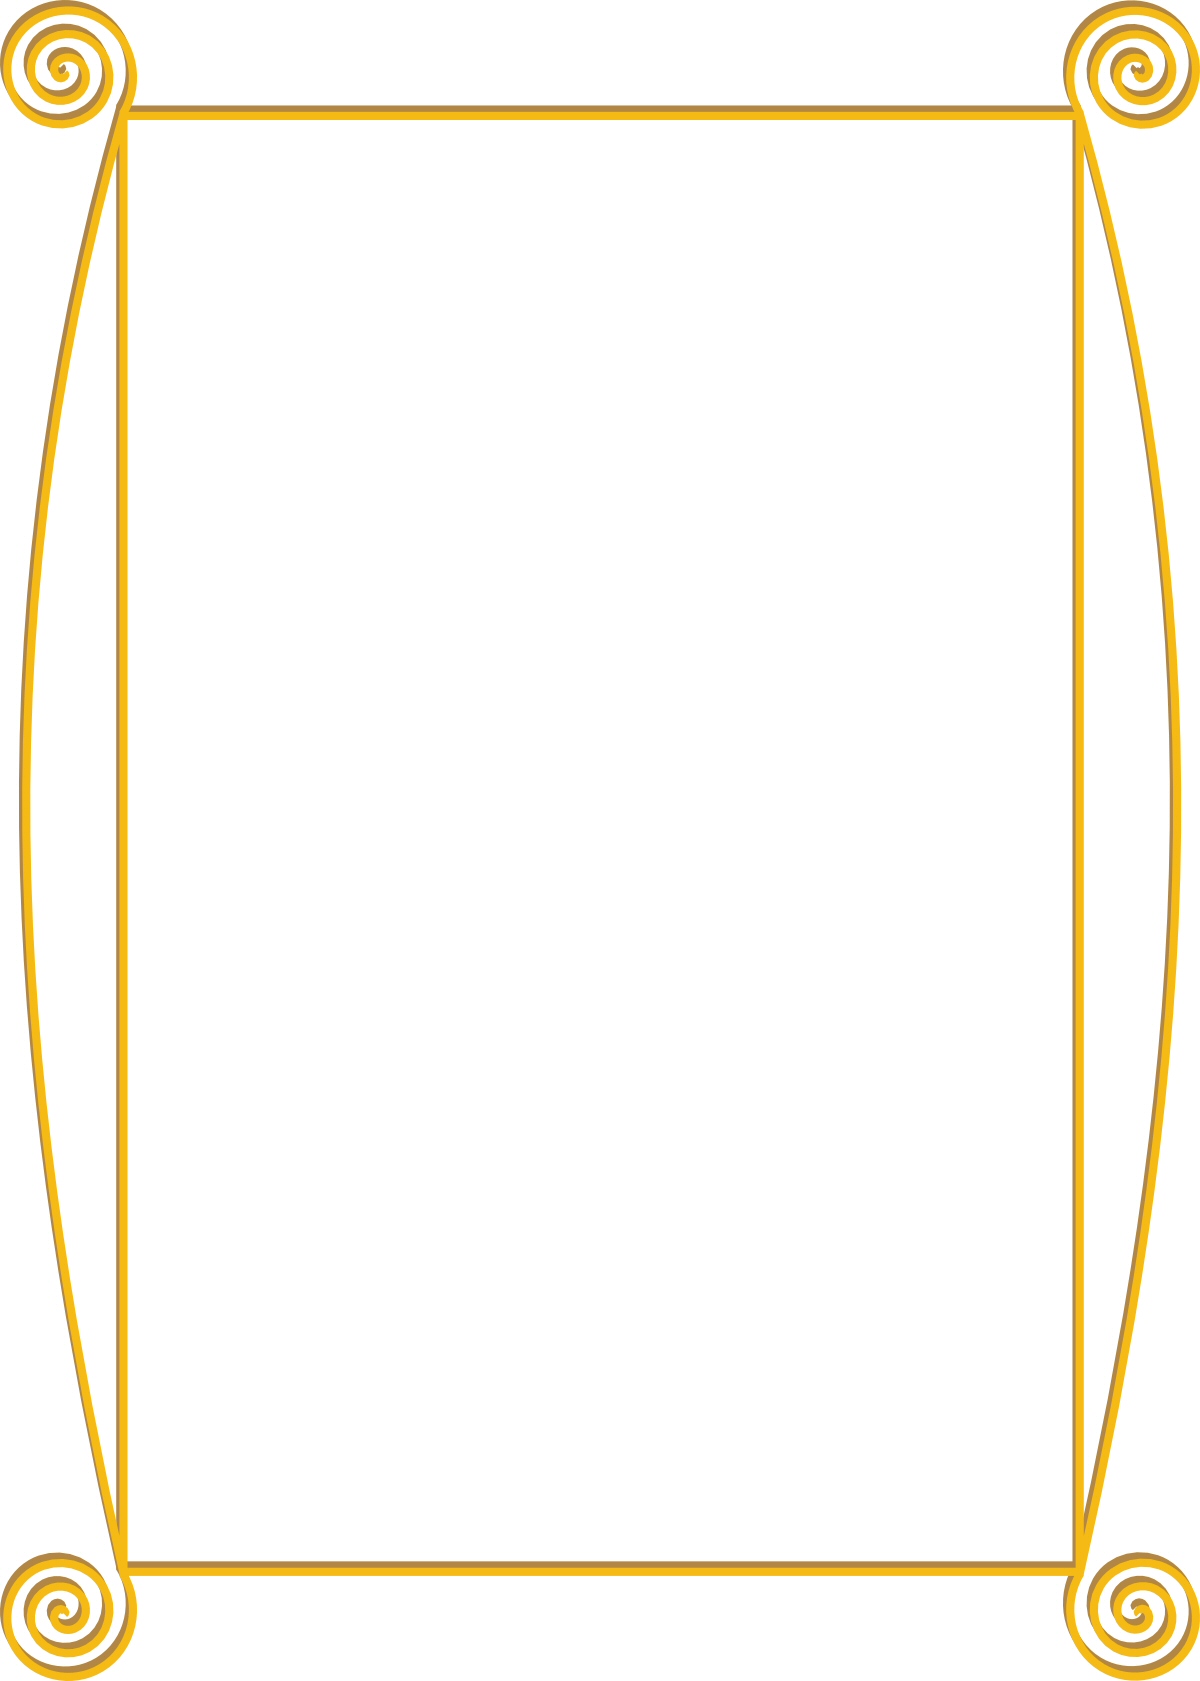 Free Gold Border Clipart